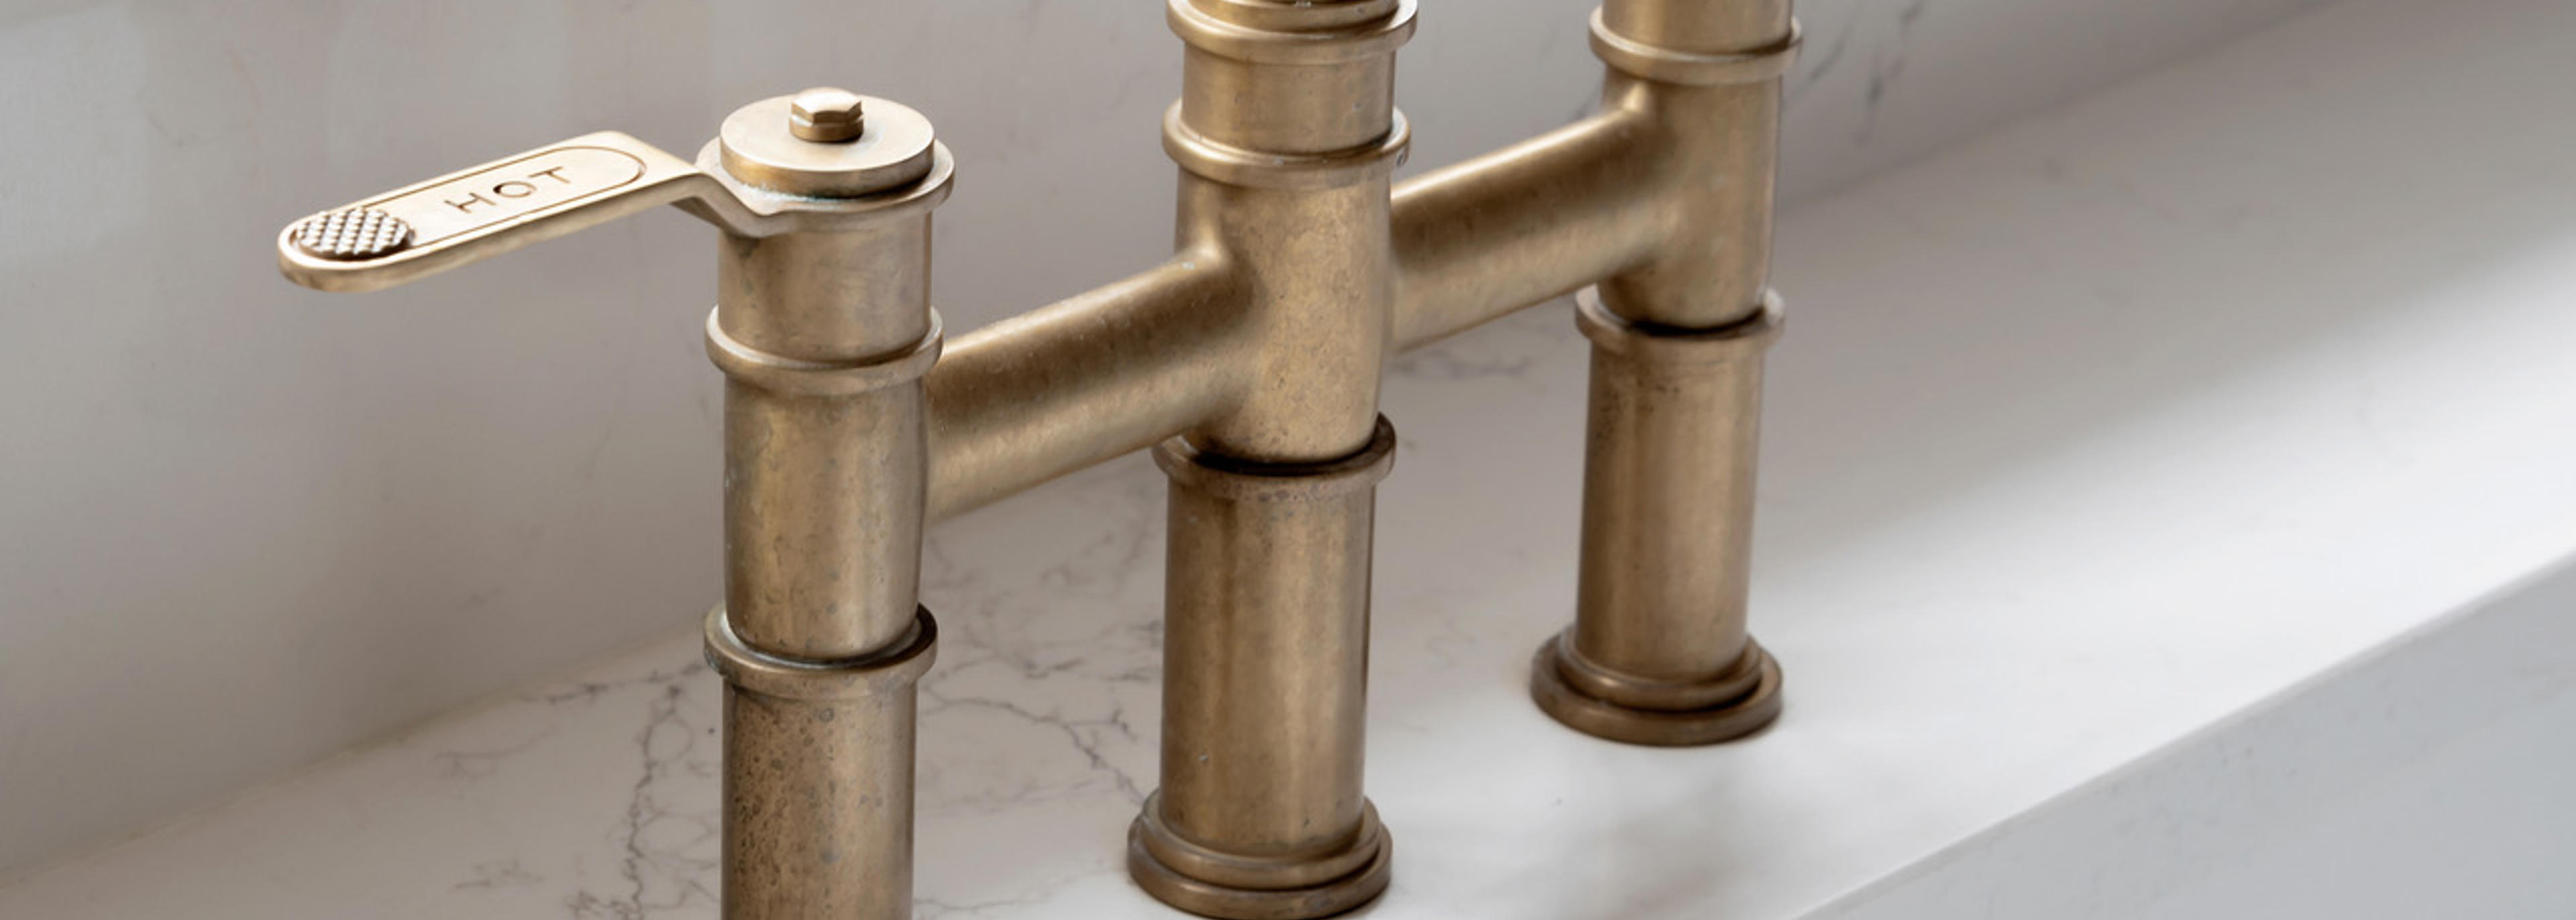 Caring for your Perrin & Rowe tap